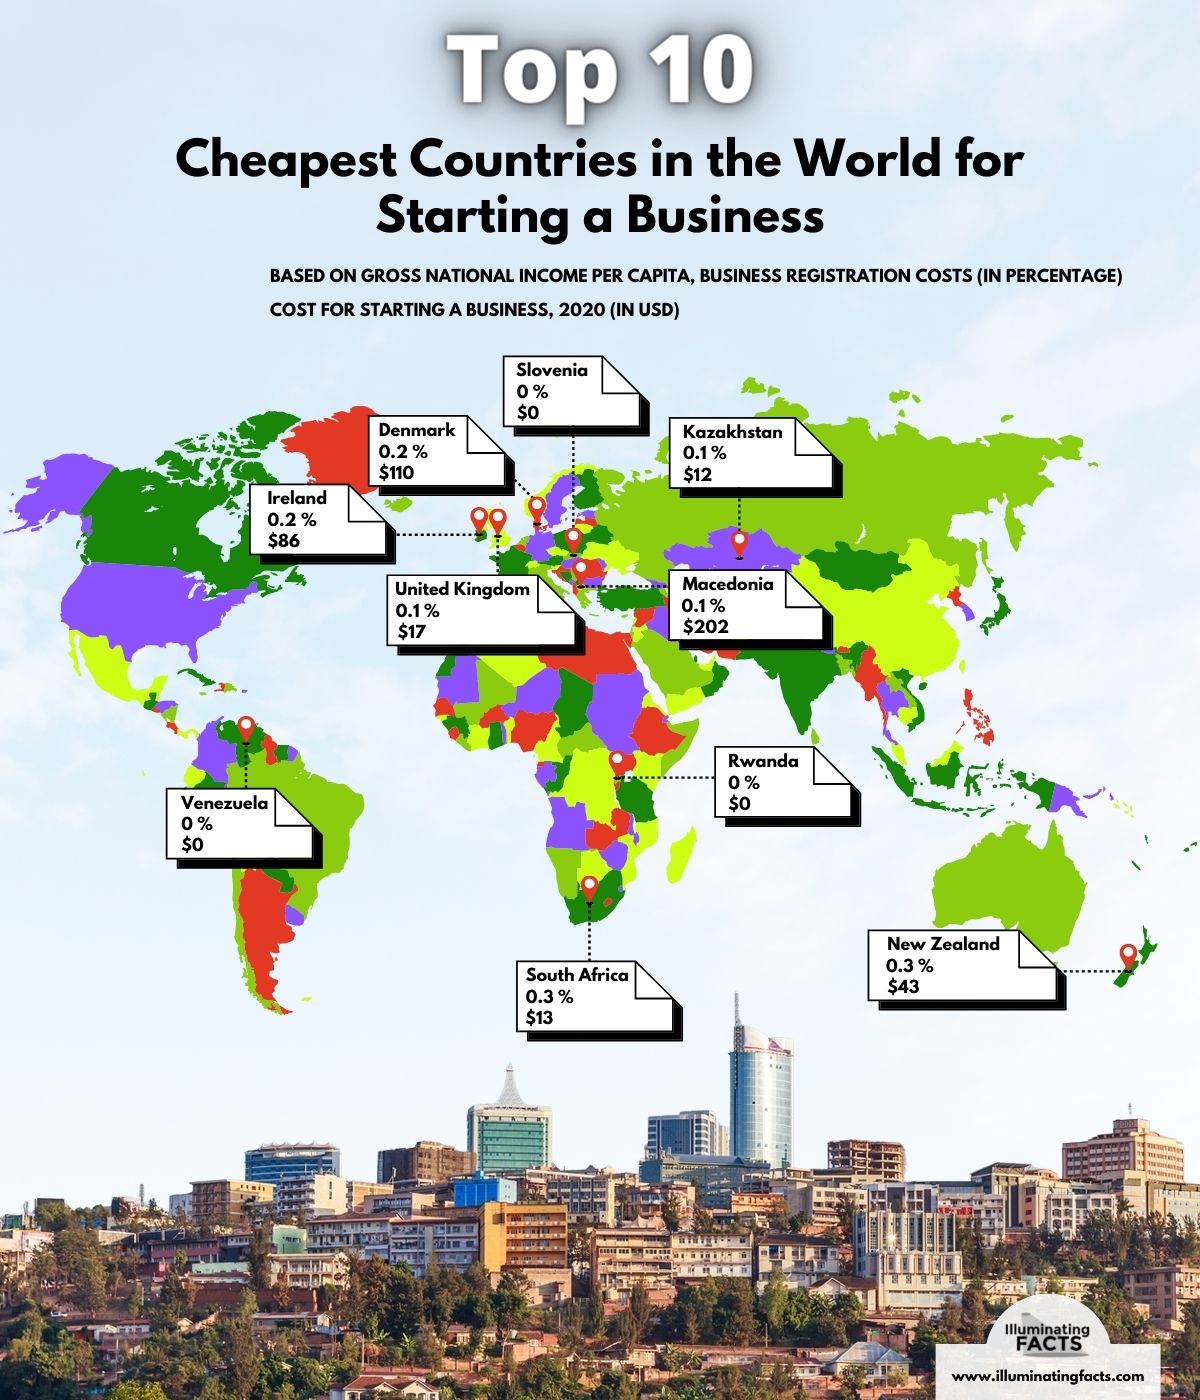 Top 10 Cheapest Countries in the World for Starting a Business